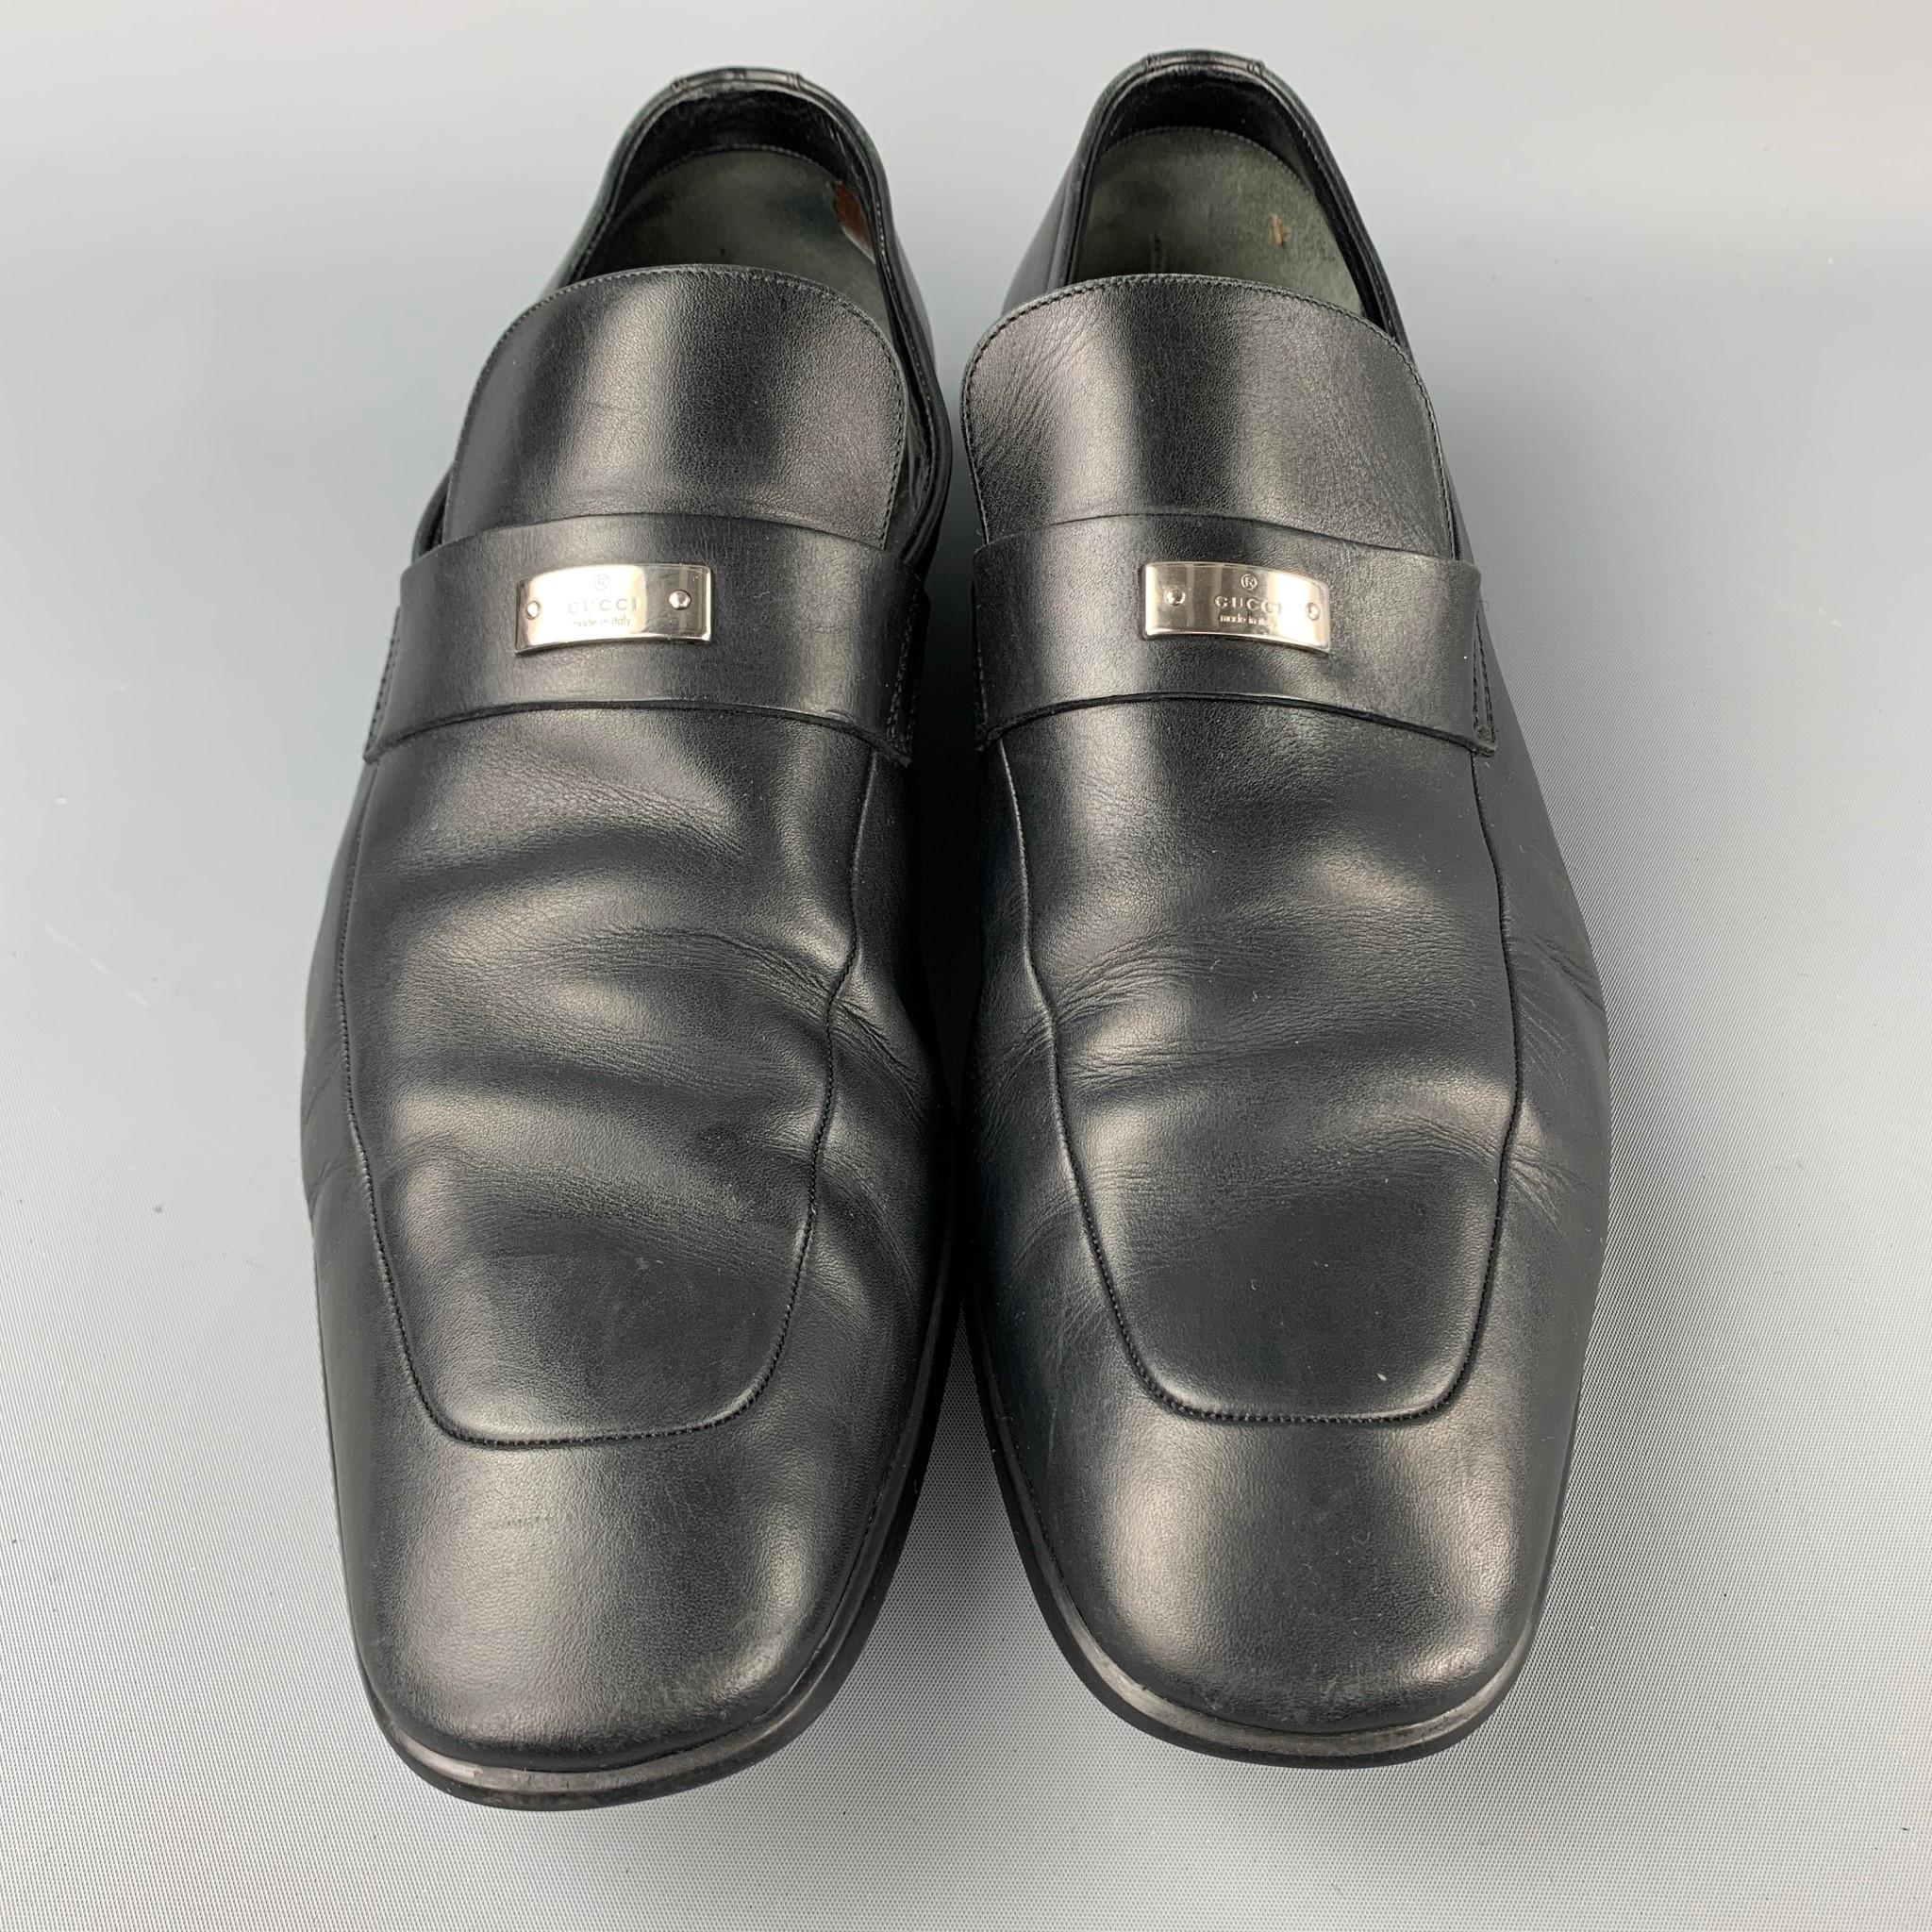 Men's GUCCI Size 11.5 Black Leather Slip On Loafers